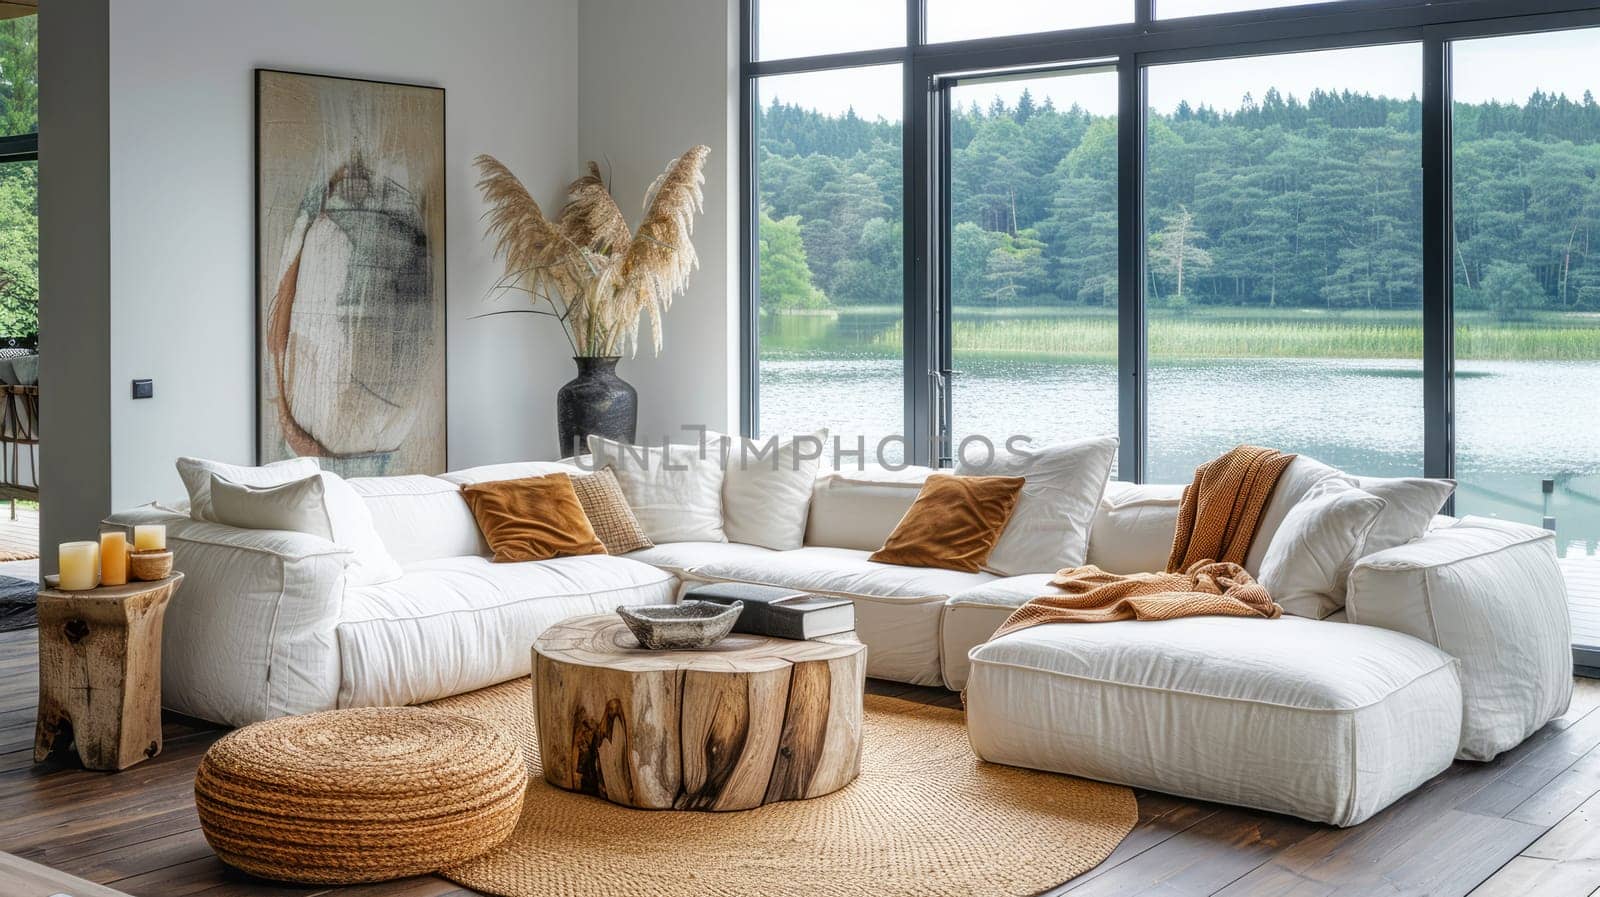 Living room with sofa and large windows overlooking the lake.